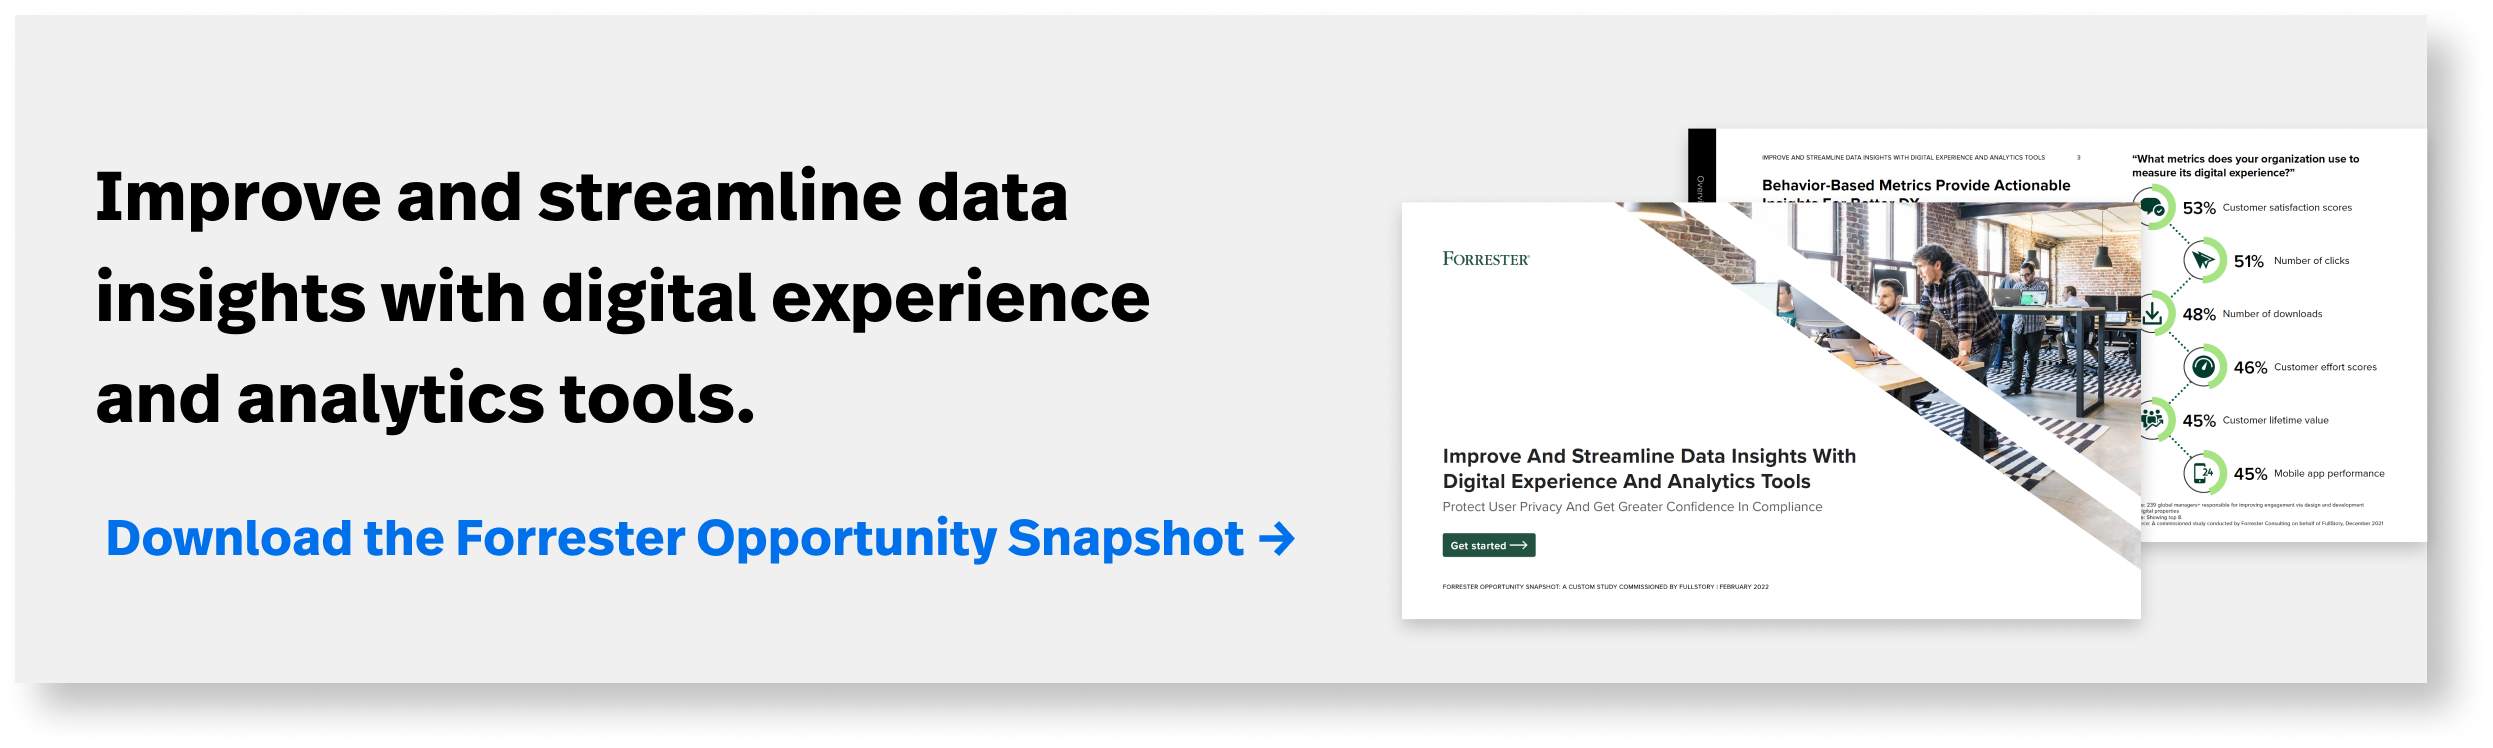 forrester-oportunity-snapshot-callout-2